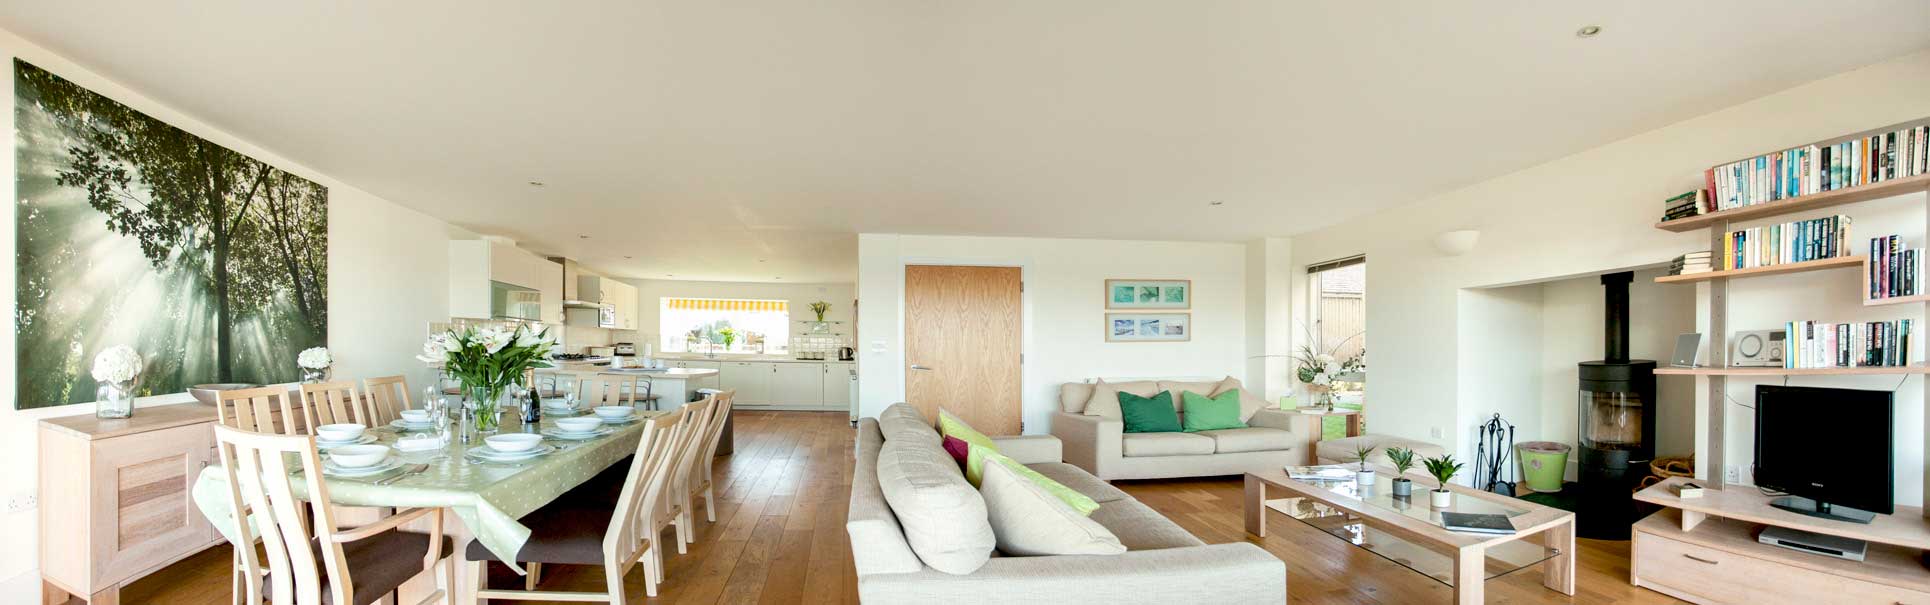 Waterhaze Lodge, Lower Mill Estate - Living and Dining area